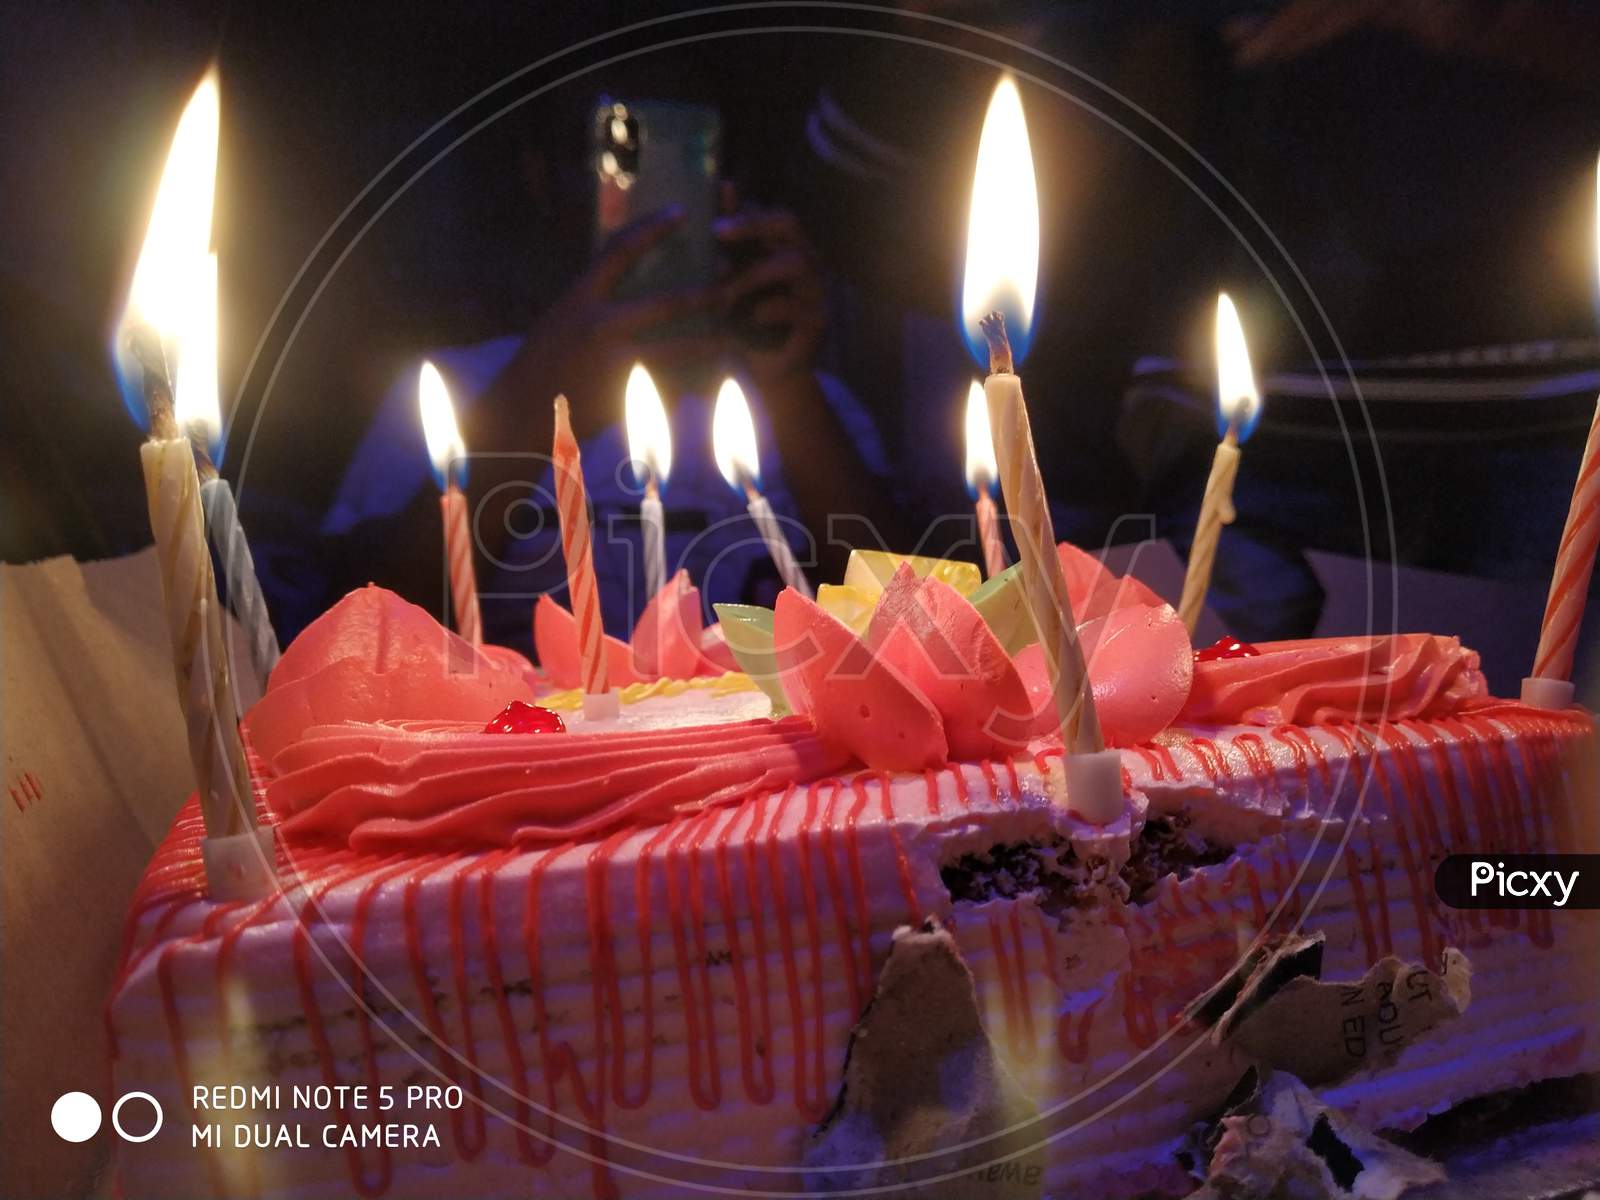 Birthday cake with candels